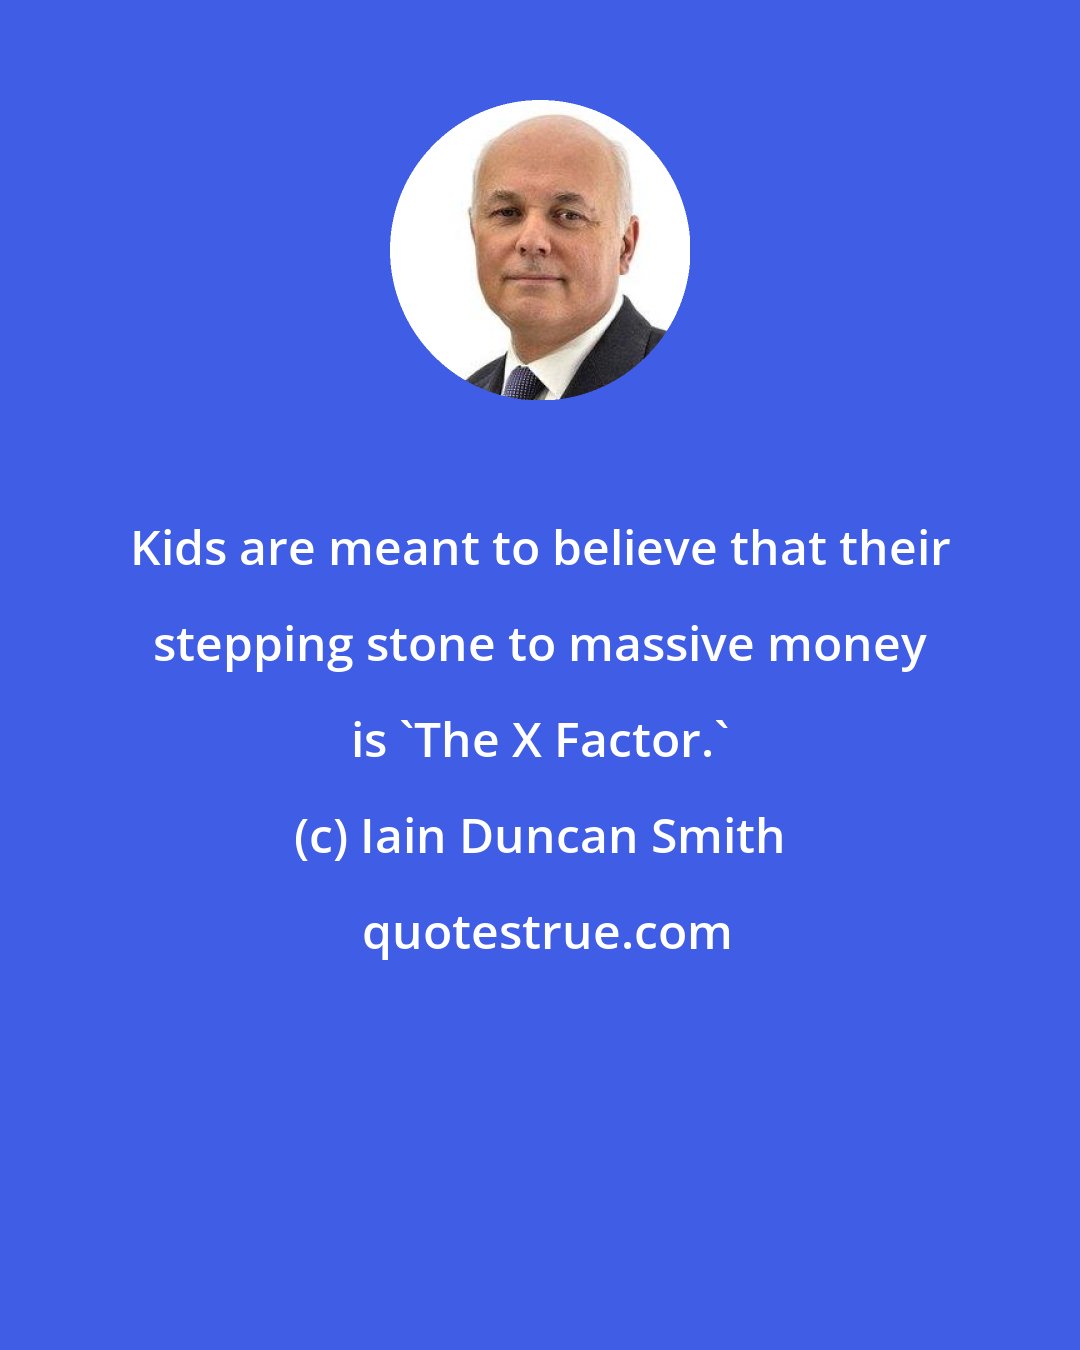 Iain Duncan Smith: Kids are meant to believe that their stepping stone to massive money is 'The X Factor.'